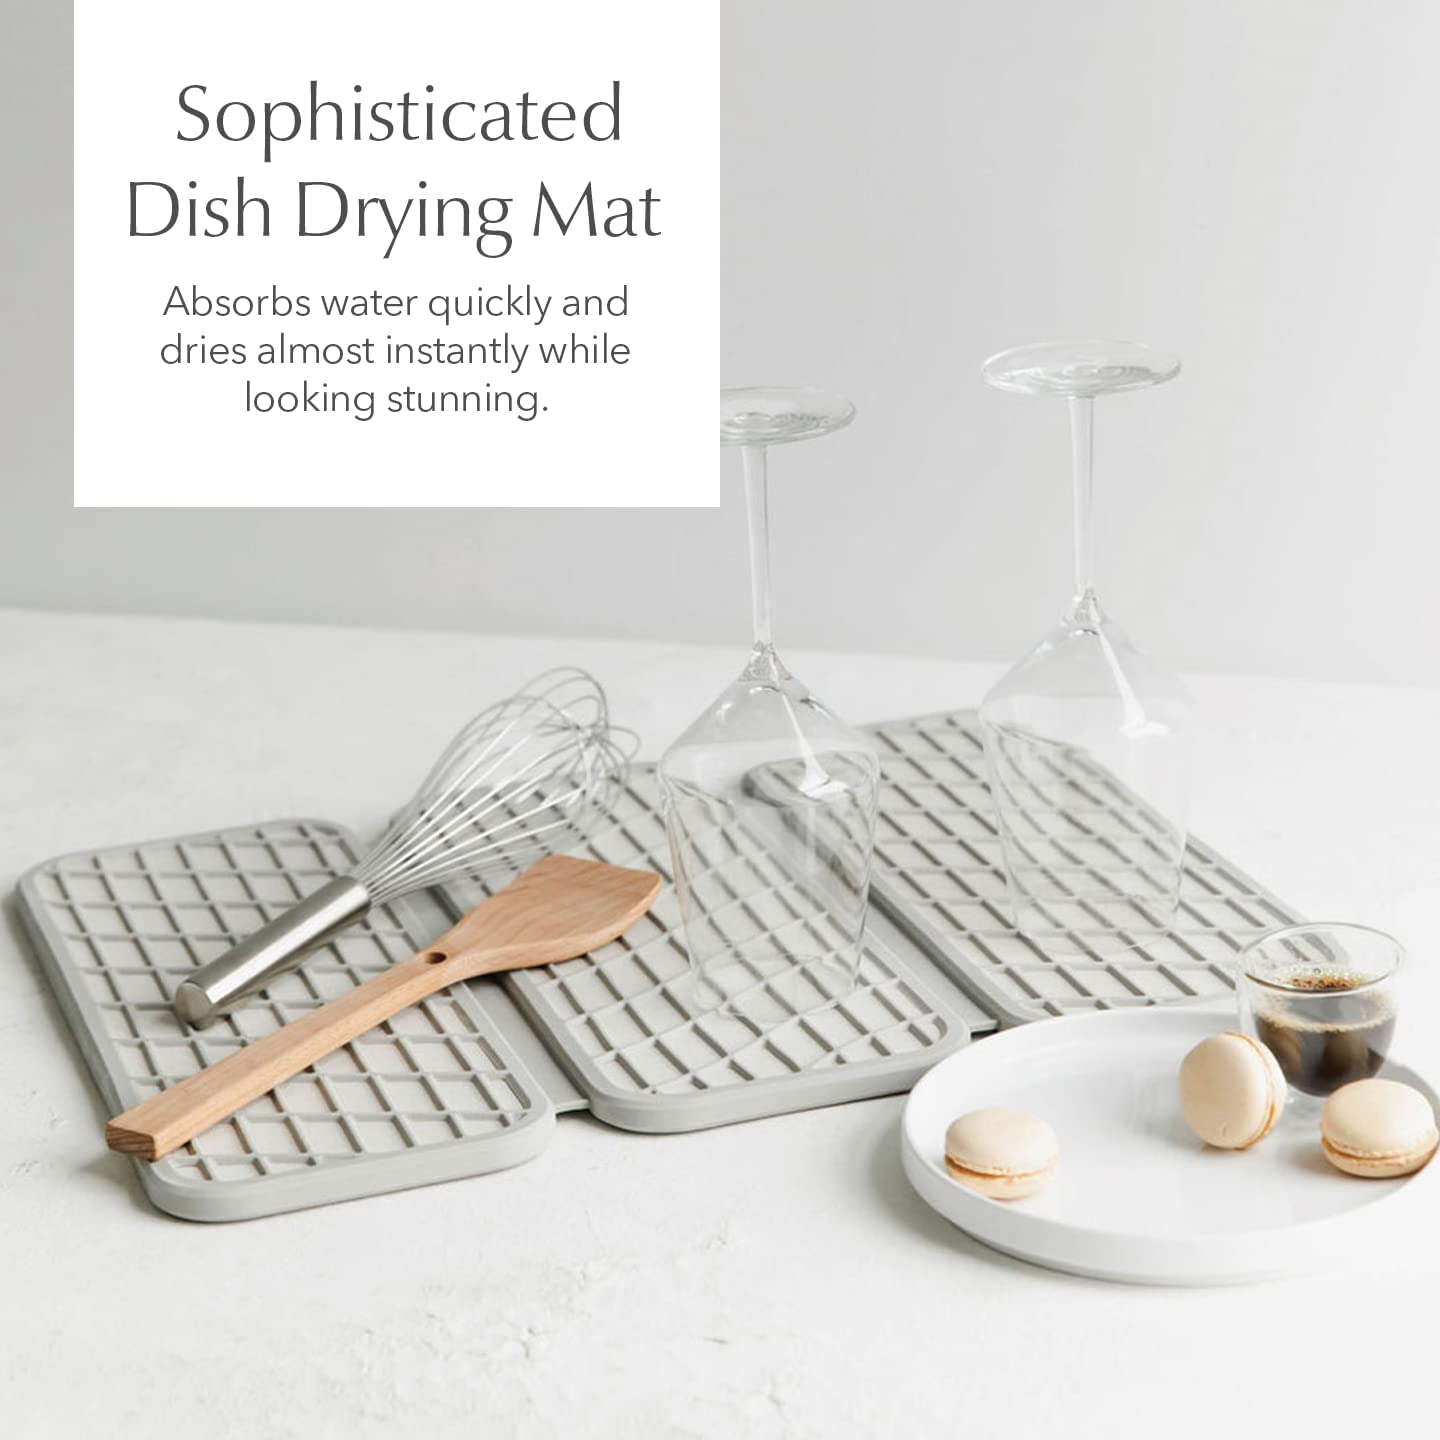 Dish Drying Mats for Kitchen. Dish drying mats are becoming famous